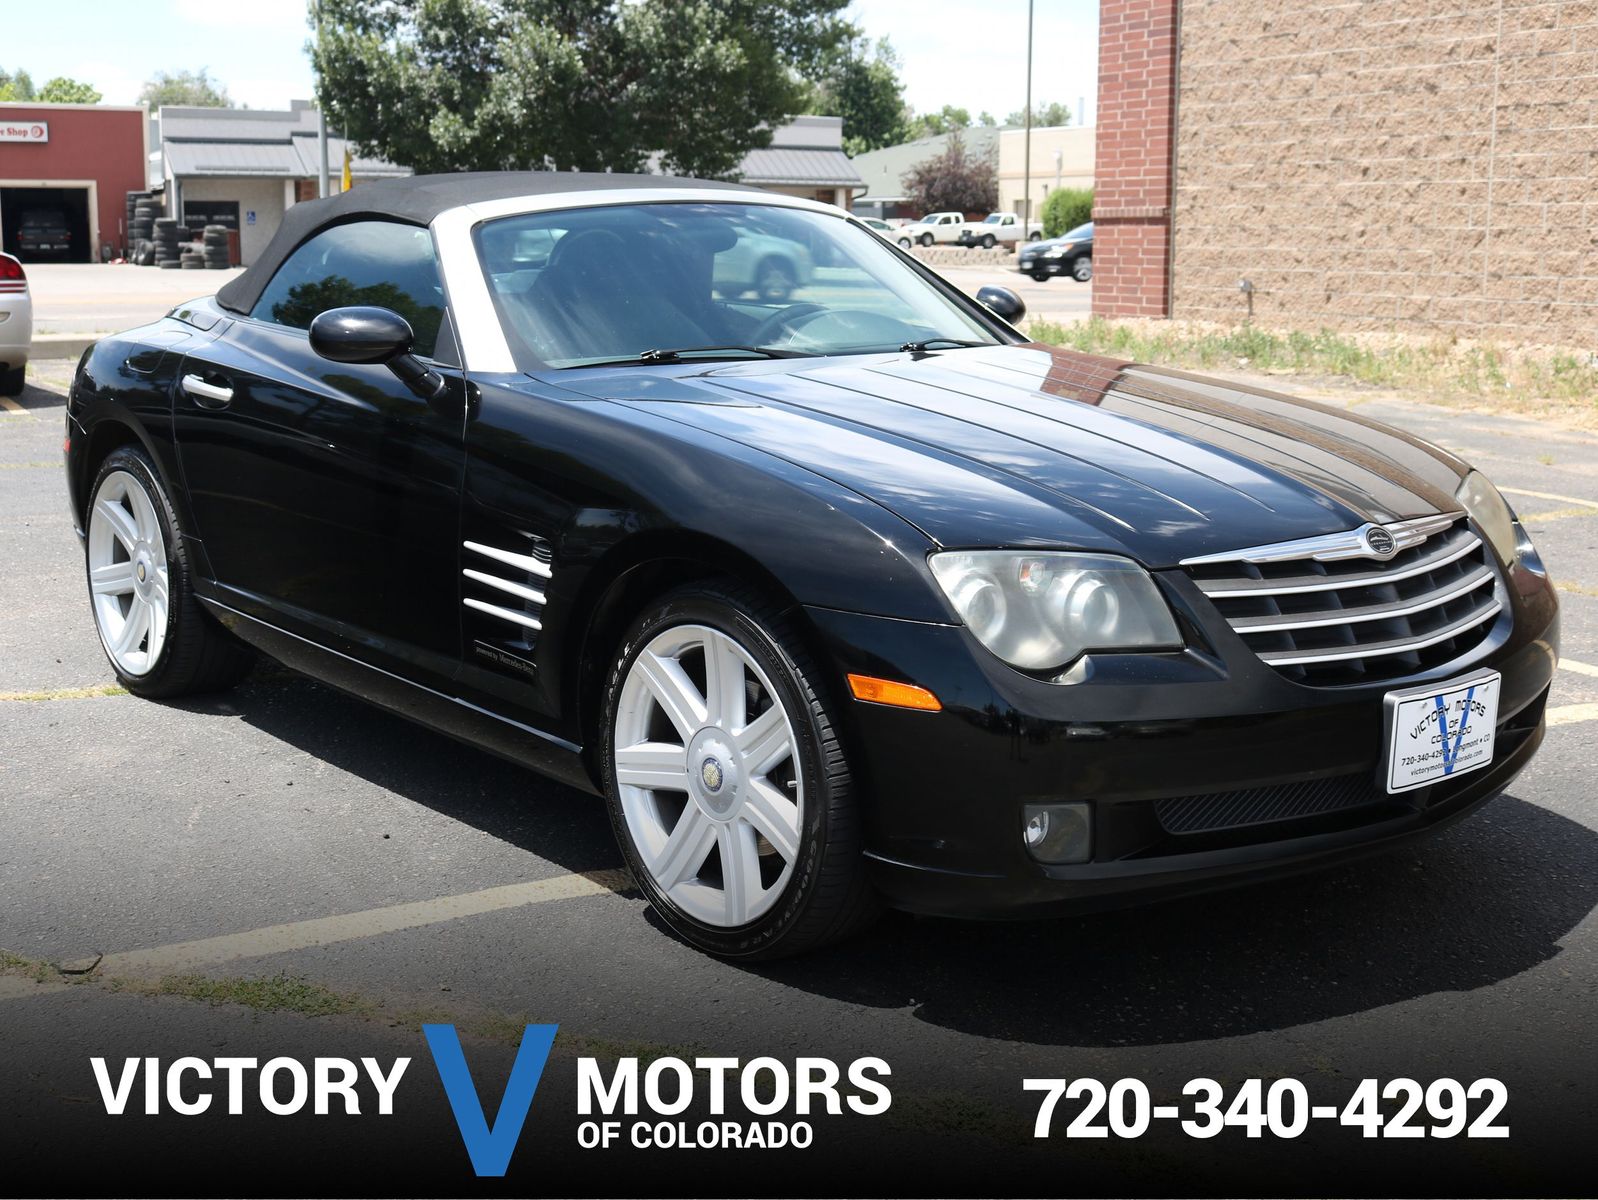 2006 Chrysler Crossfire Limited Victory Motors of Colorado